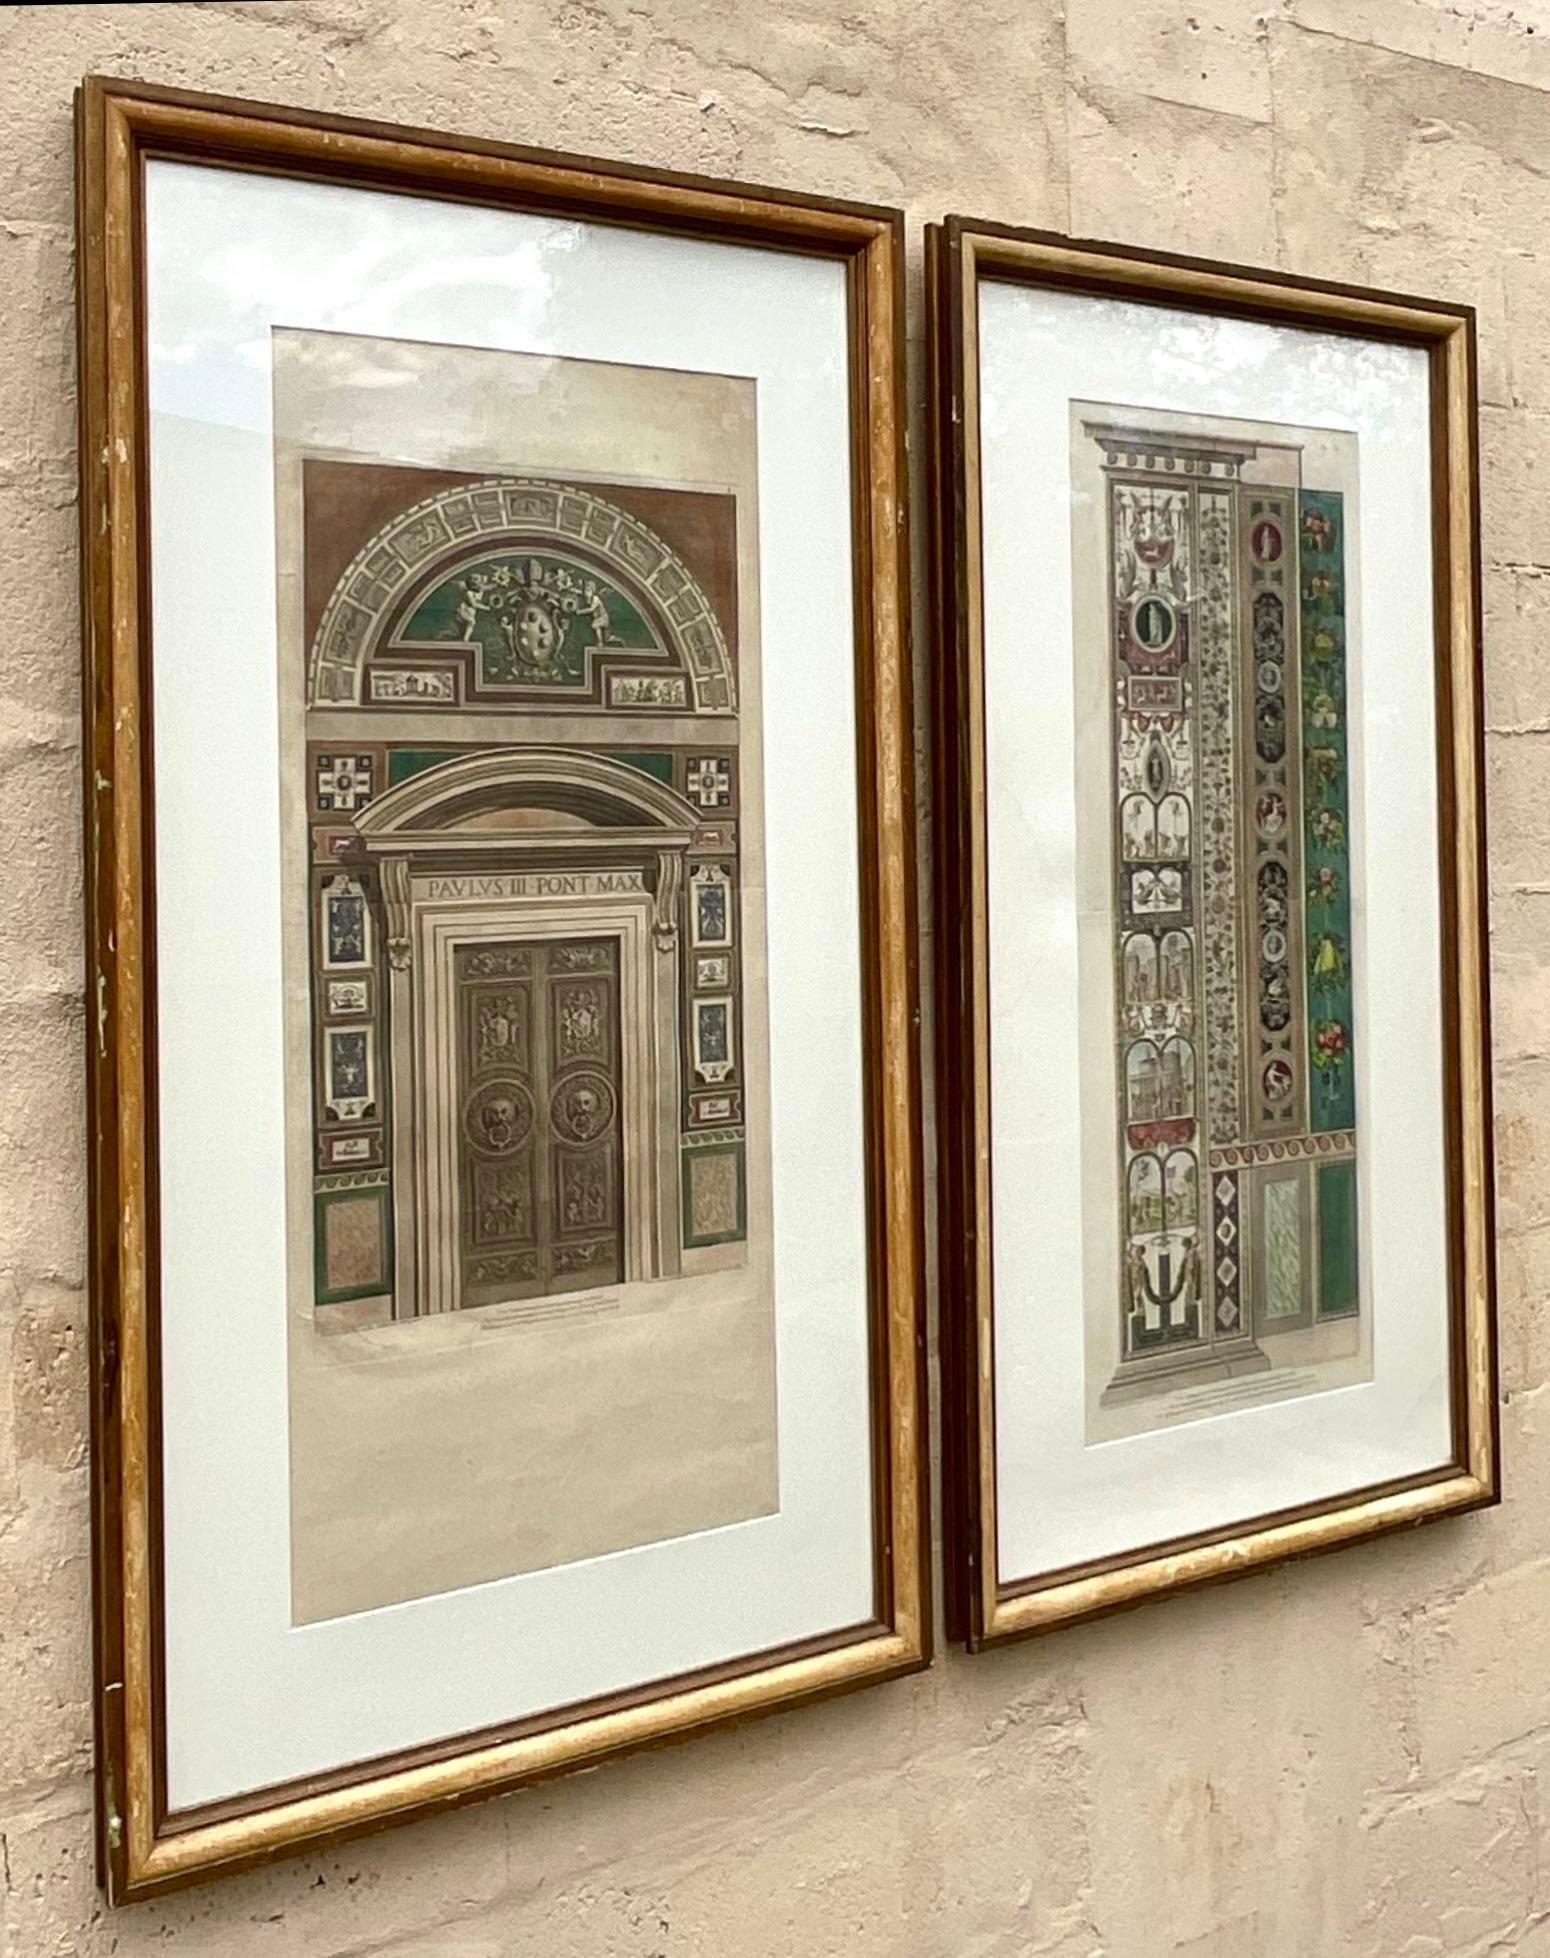 A fabulous pair of vintage hand colored engravings. Done in the manner of Raffaello’s “Le Loggie de Raffaello”. Purchased from the collection from The Breakers Hotel in Palm Beach where they used to hang in the lobby.